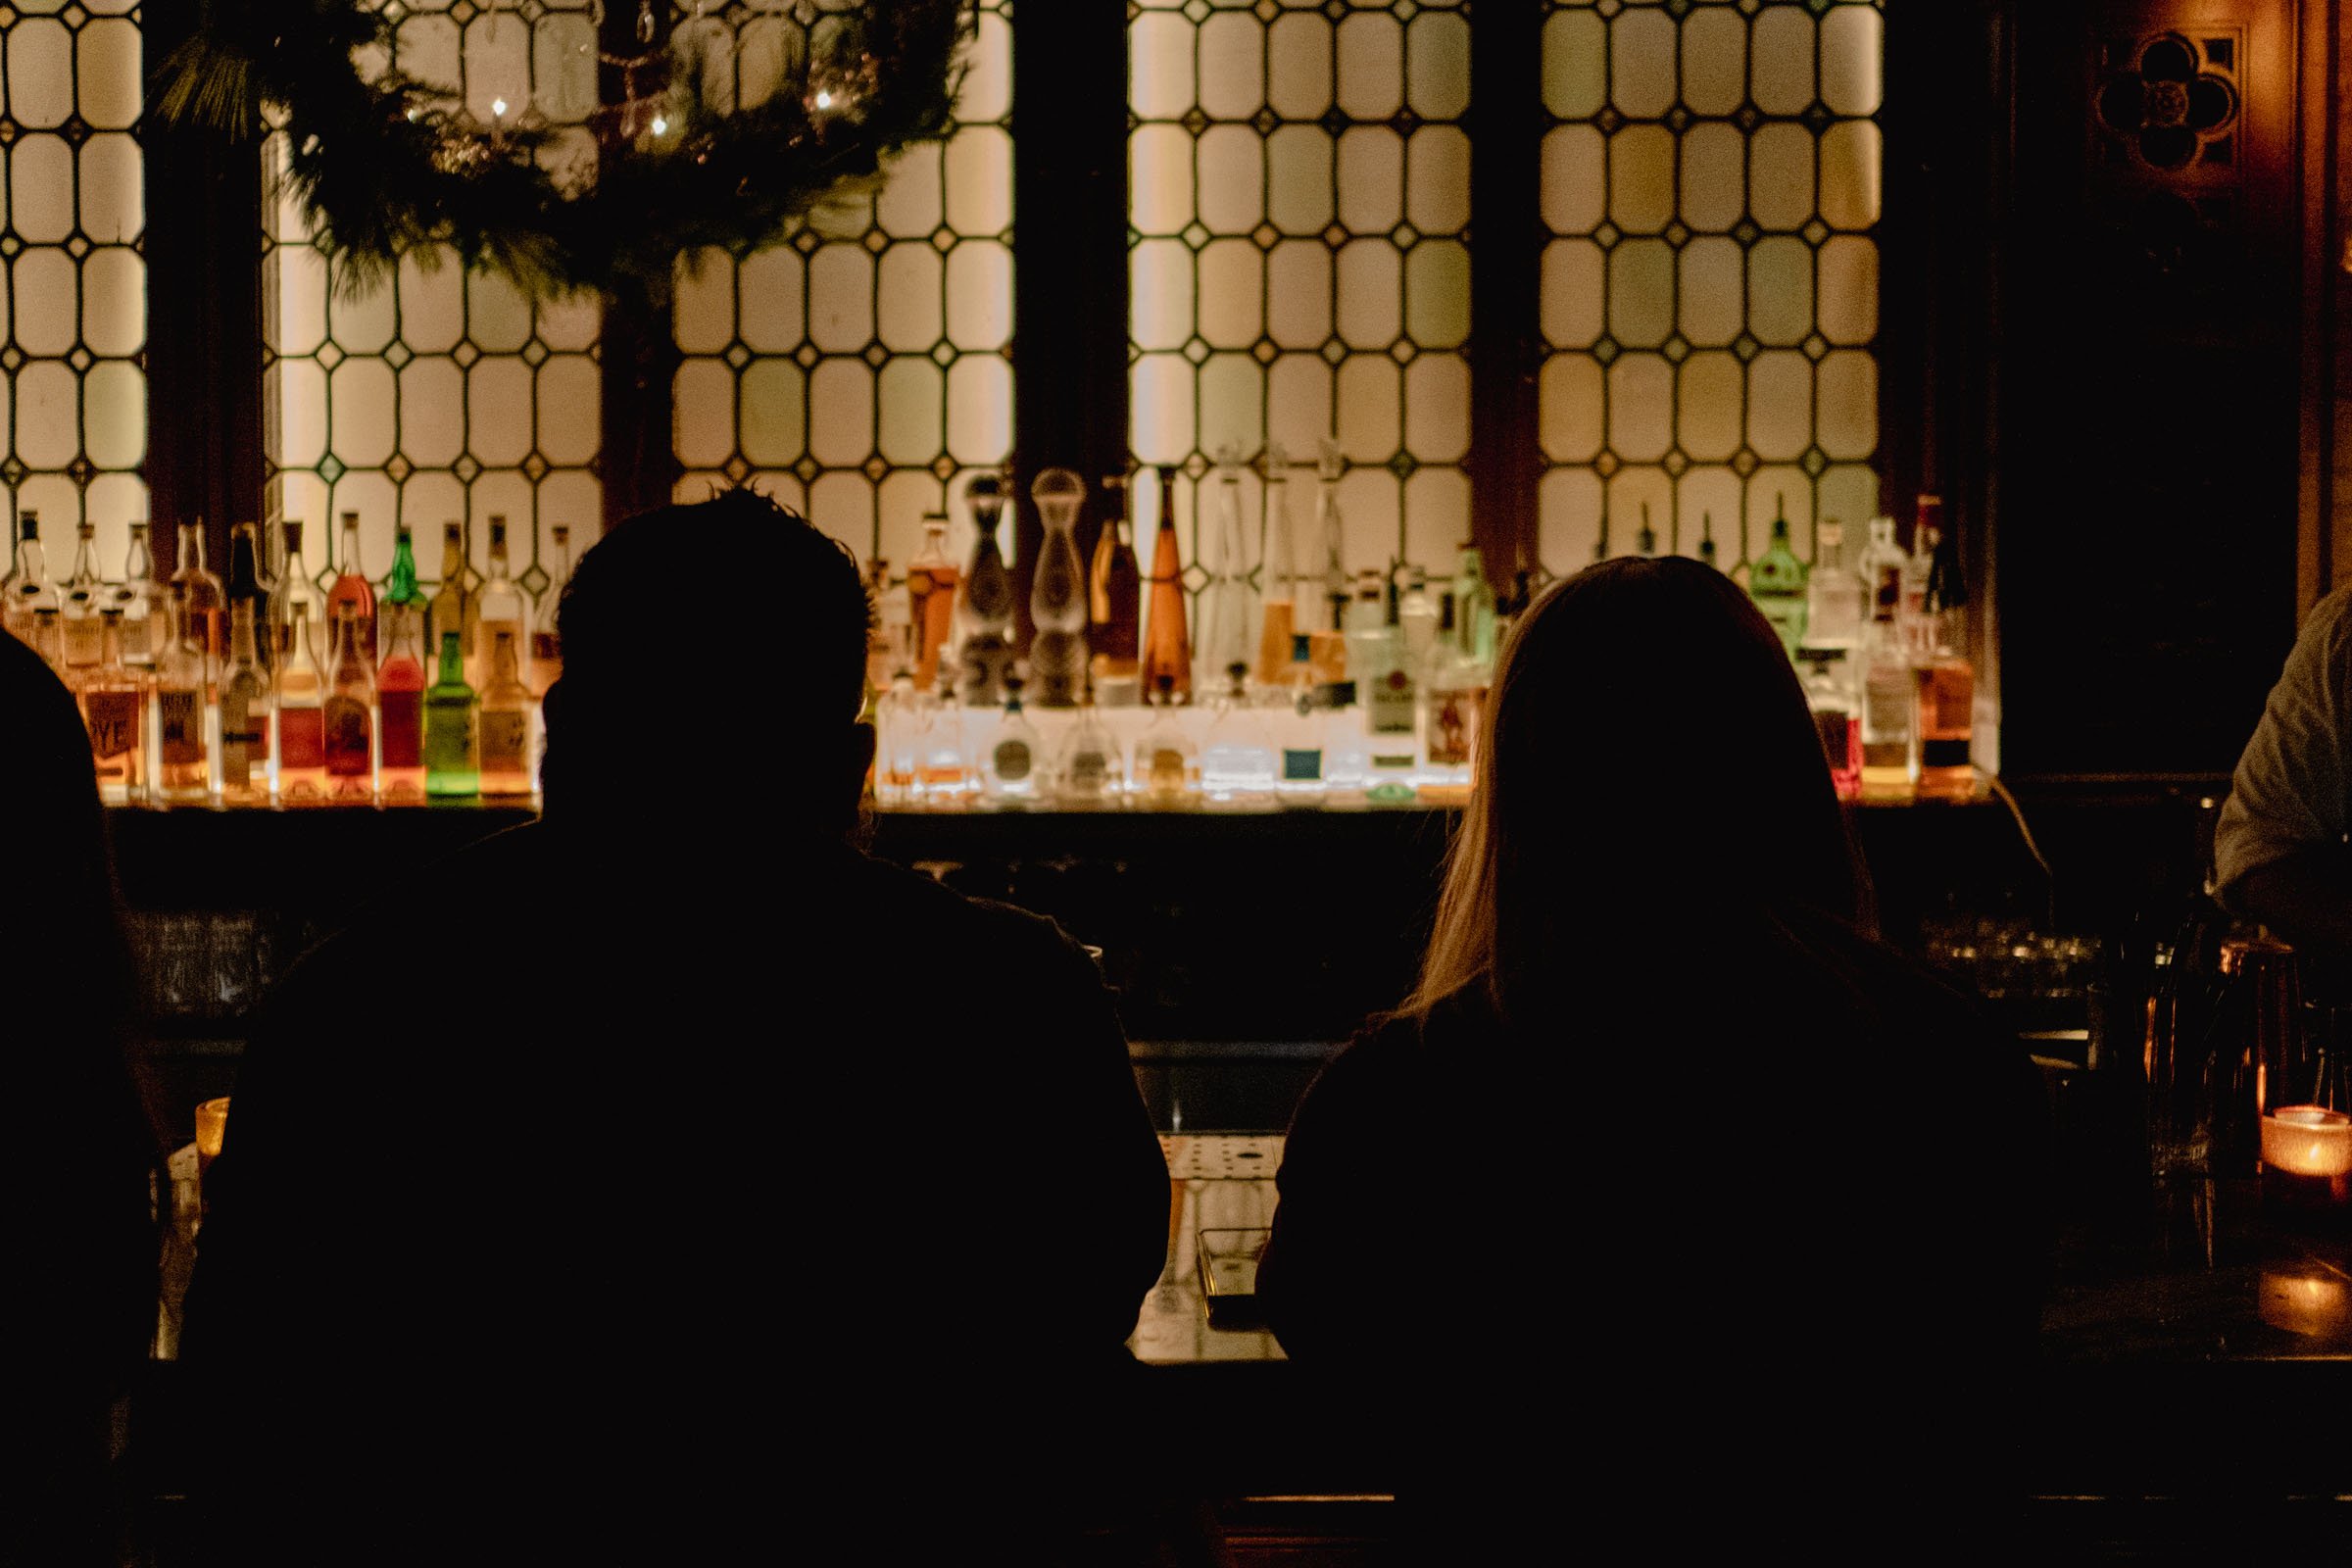 Tried and tested: My fav bars in NYC